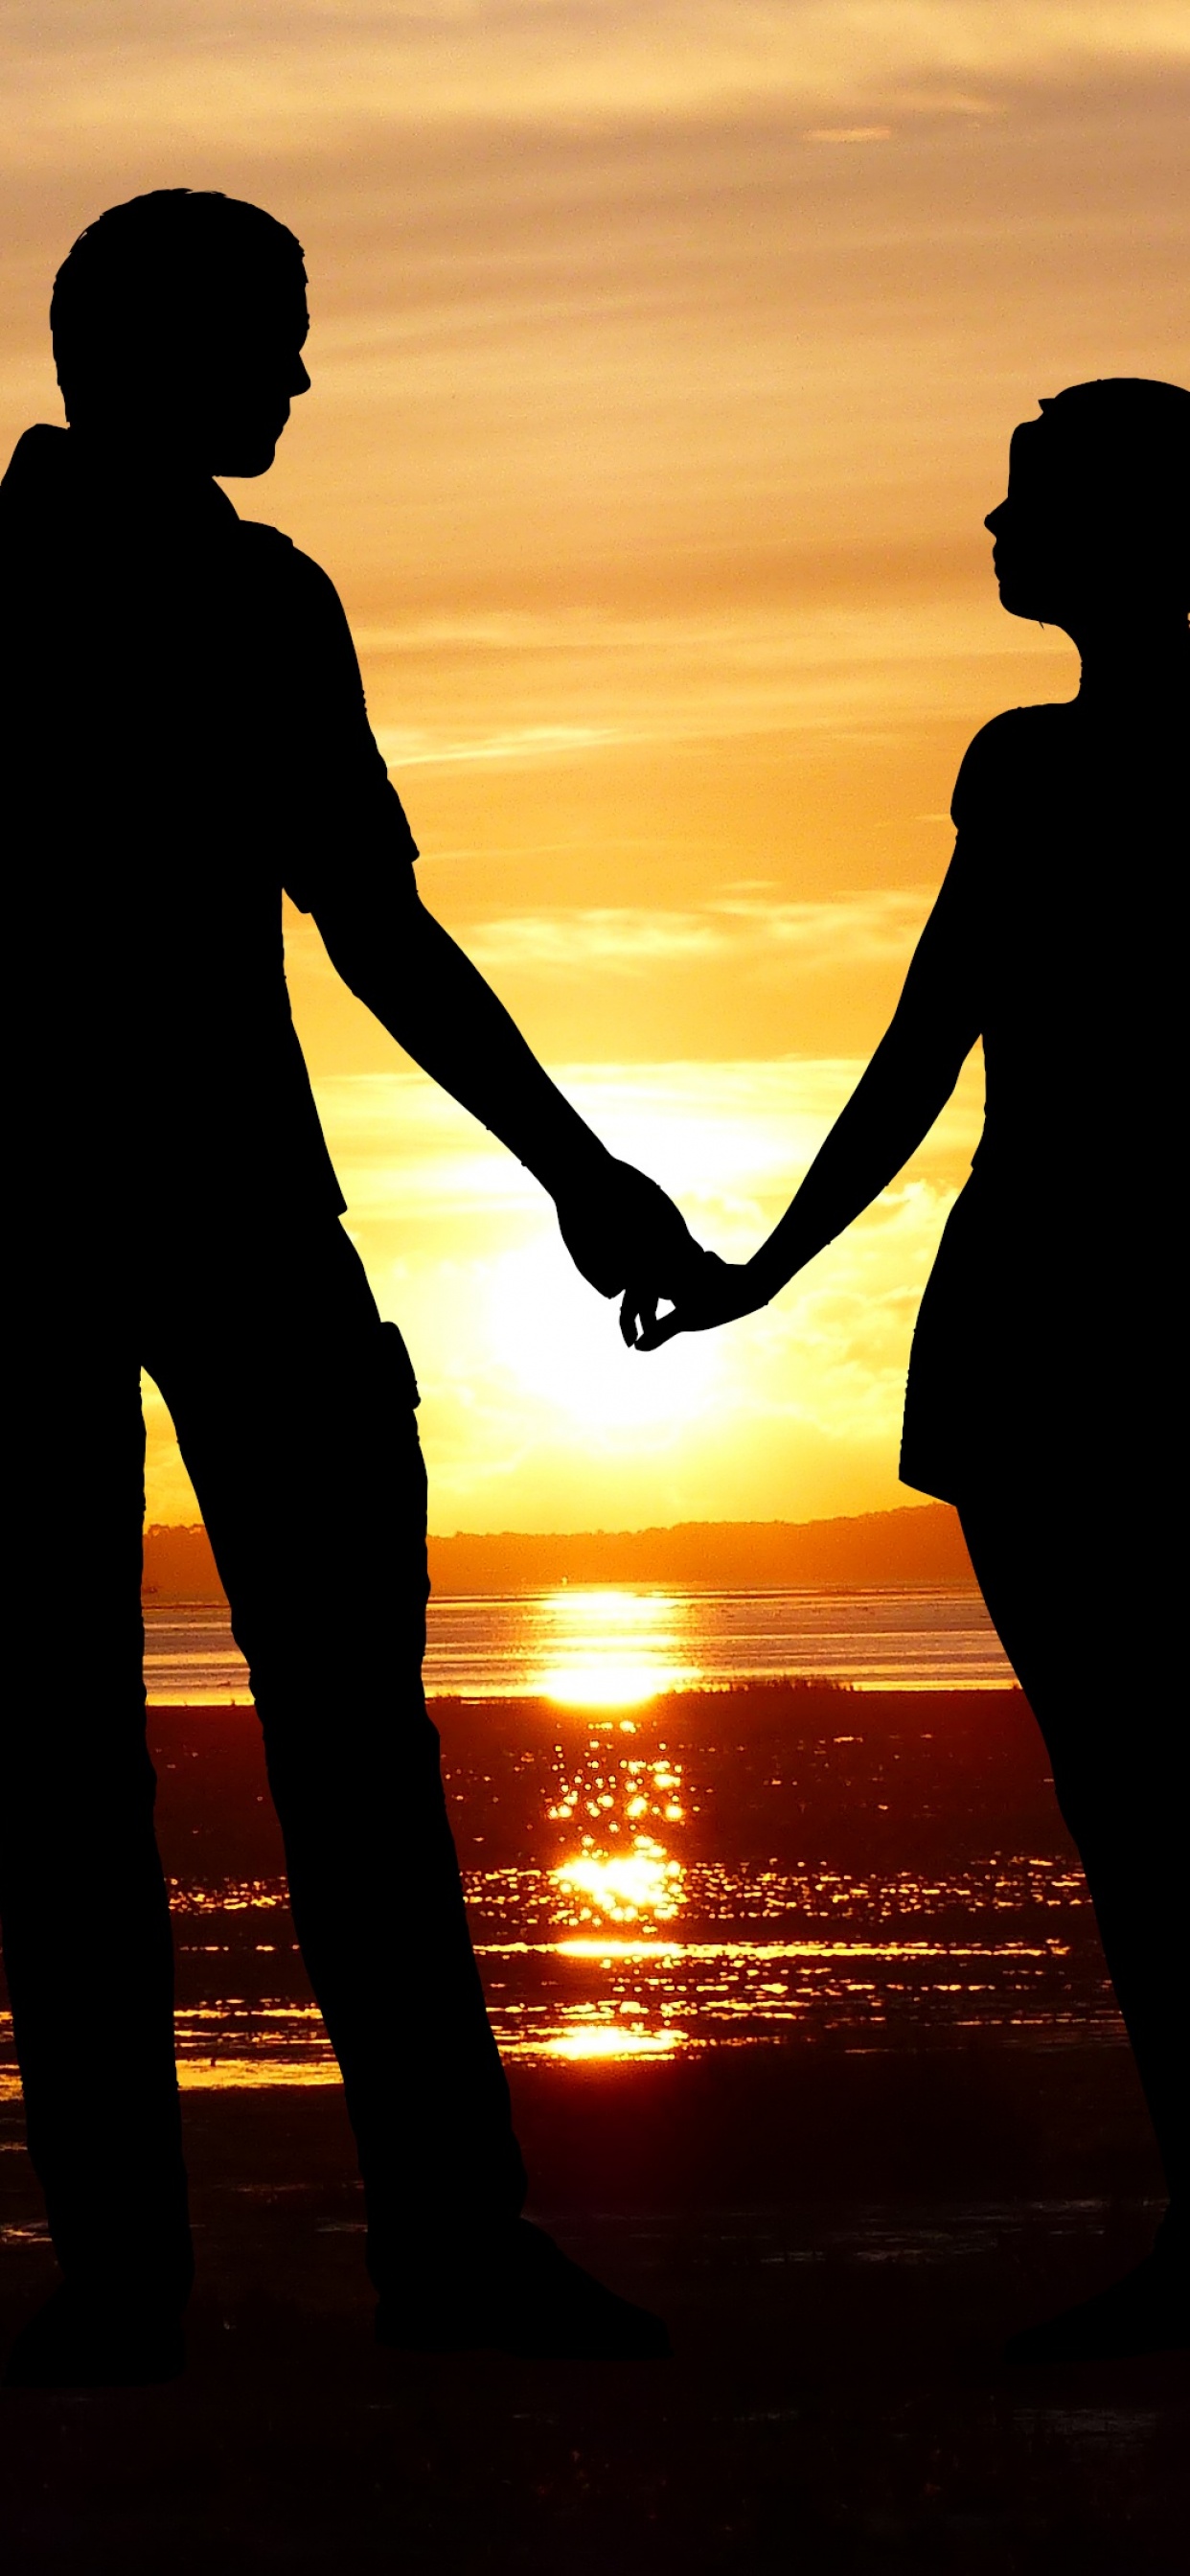 A Woman Kissing A Man Silhouette Couple Romantic Kiss Sunset Together Wallpaperlist